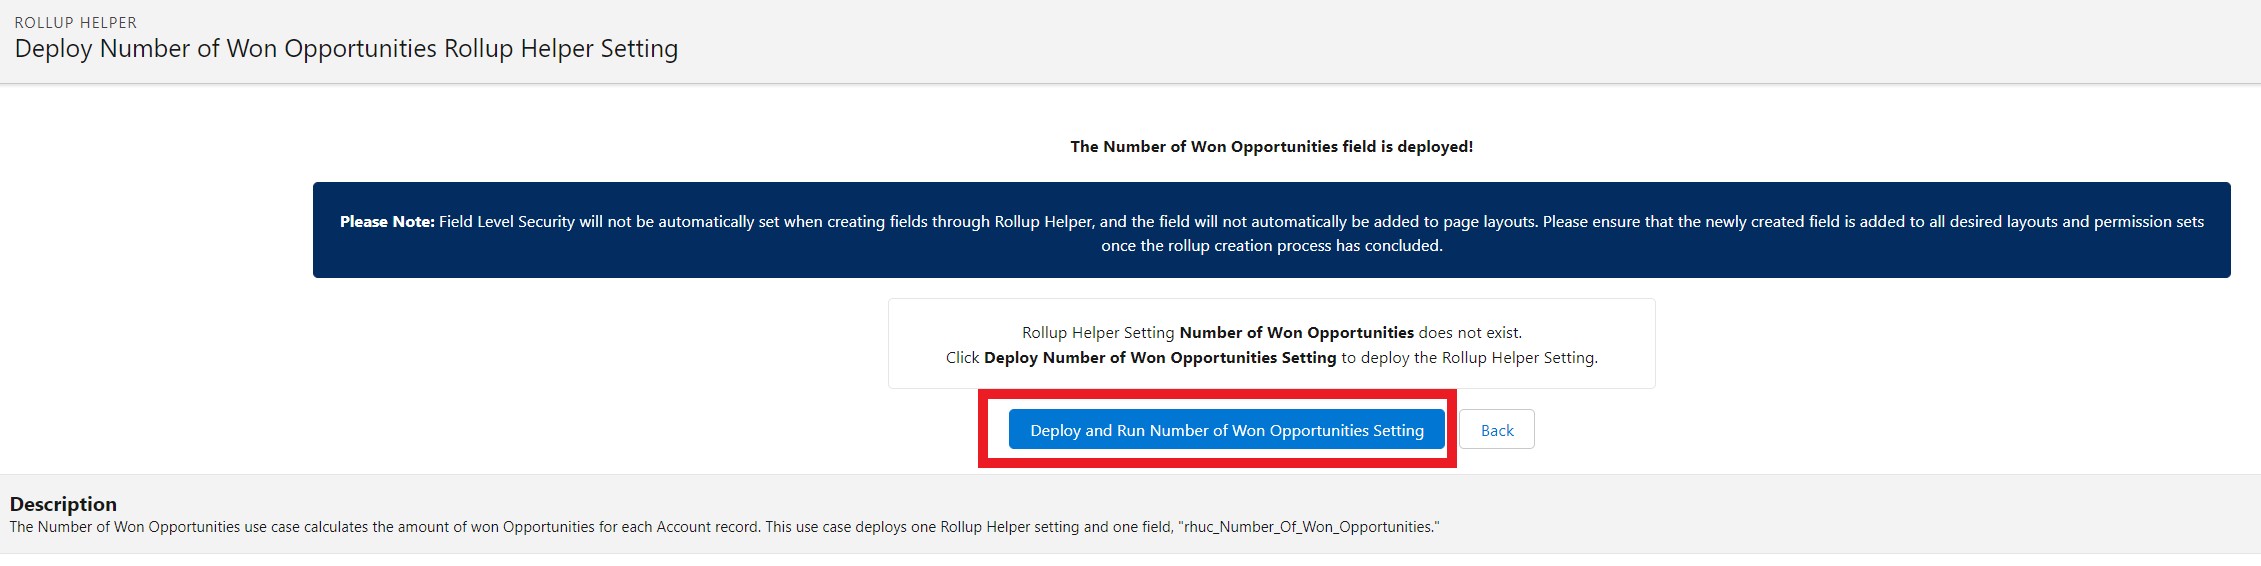 Number of Won Opportunities deploy setting